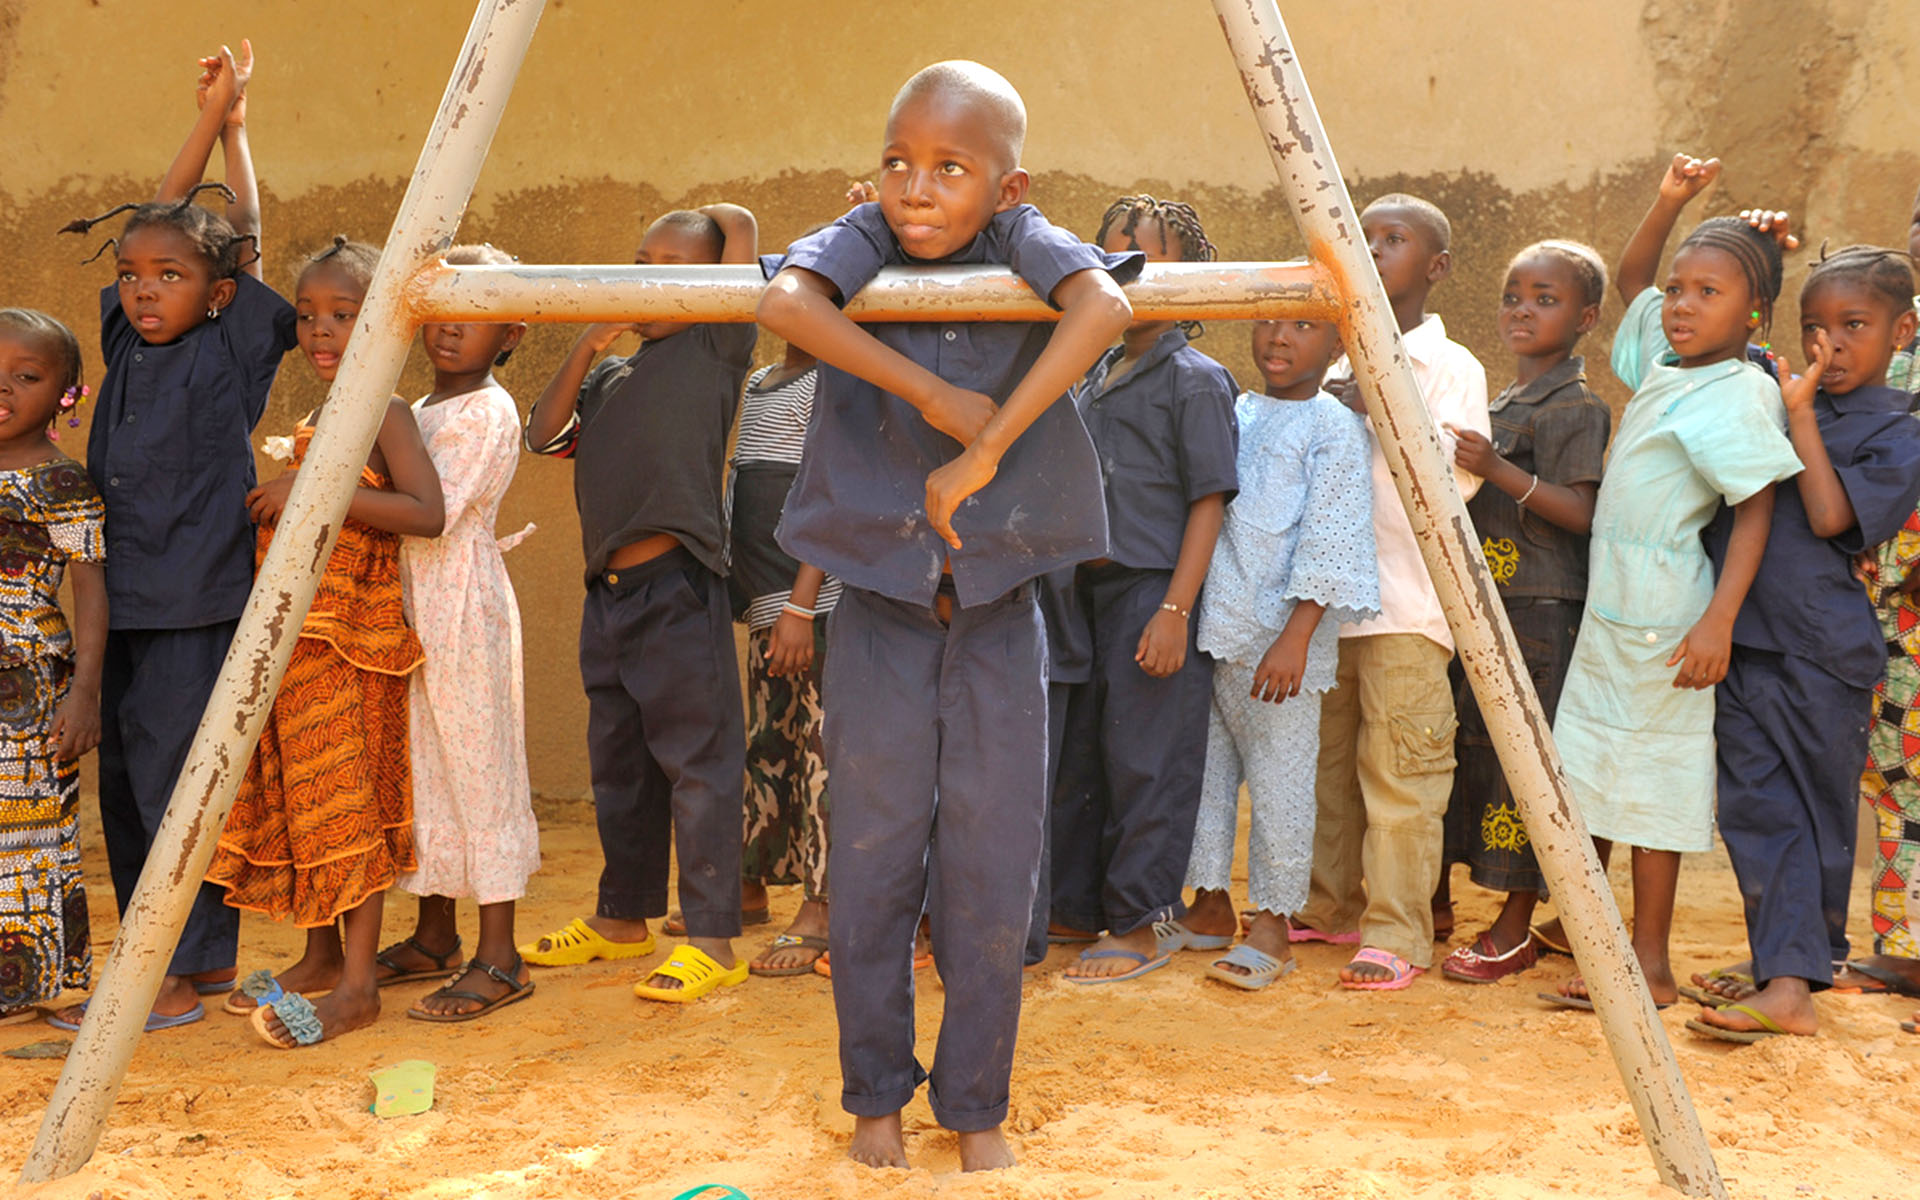 A boy plays on a swingset at his Compassion center